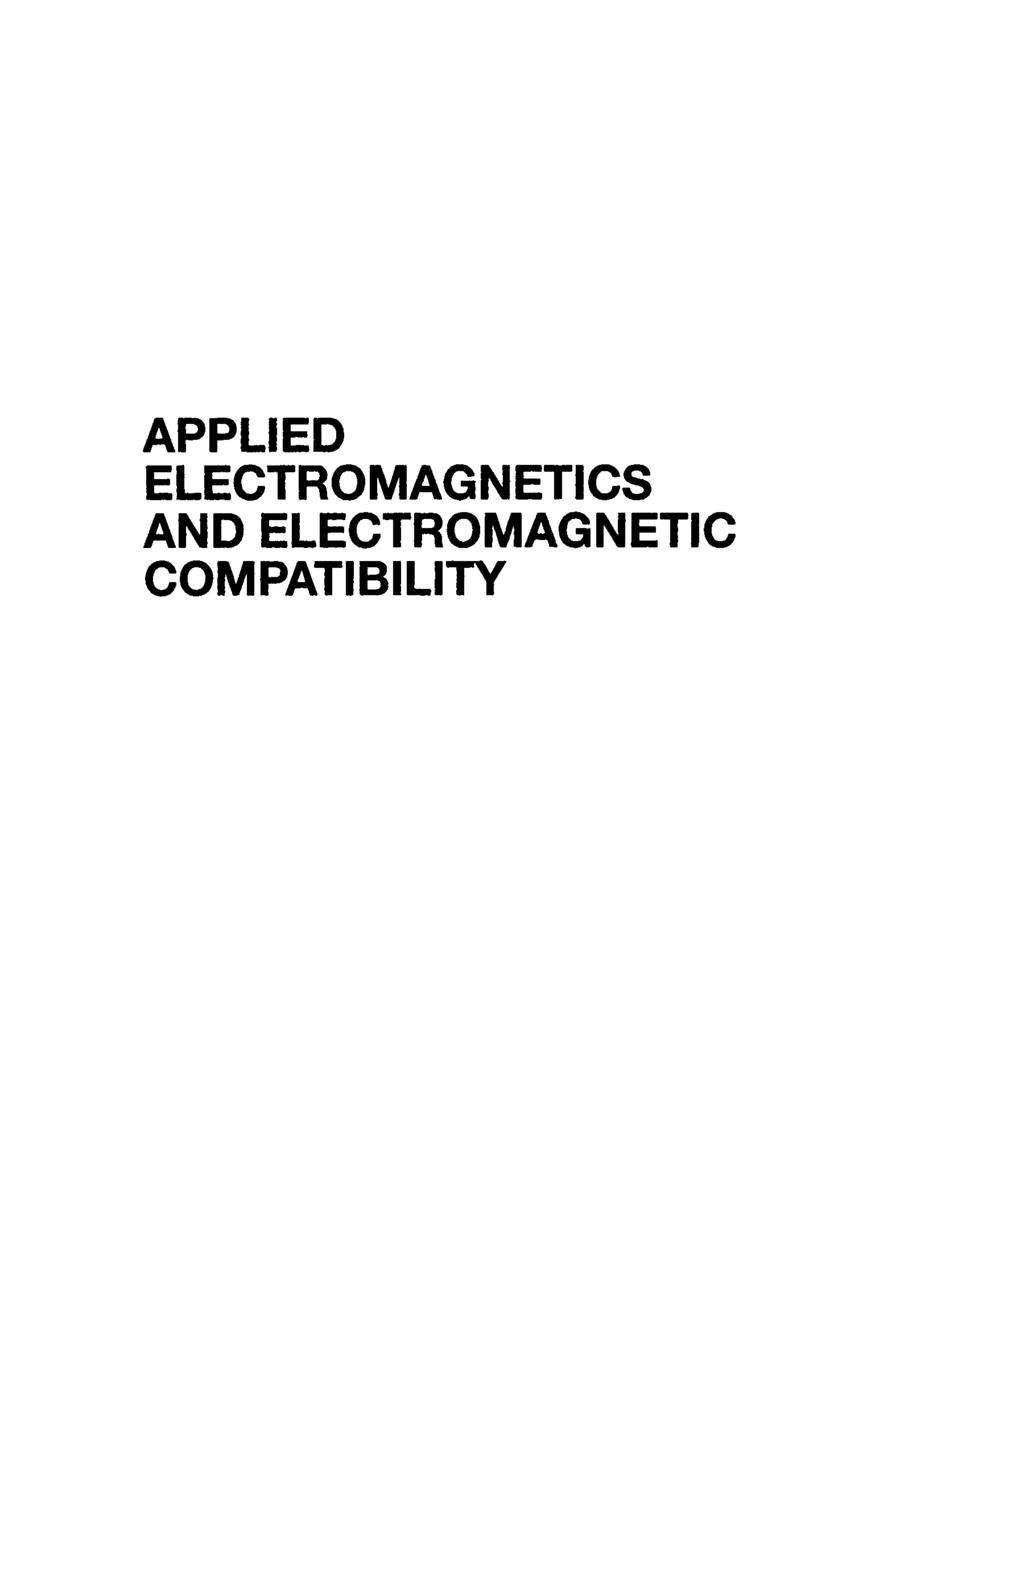 APPLIED ELECTROMAGNETICS AND